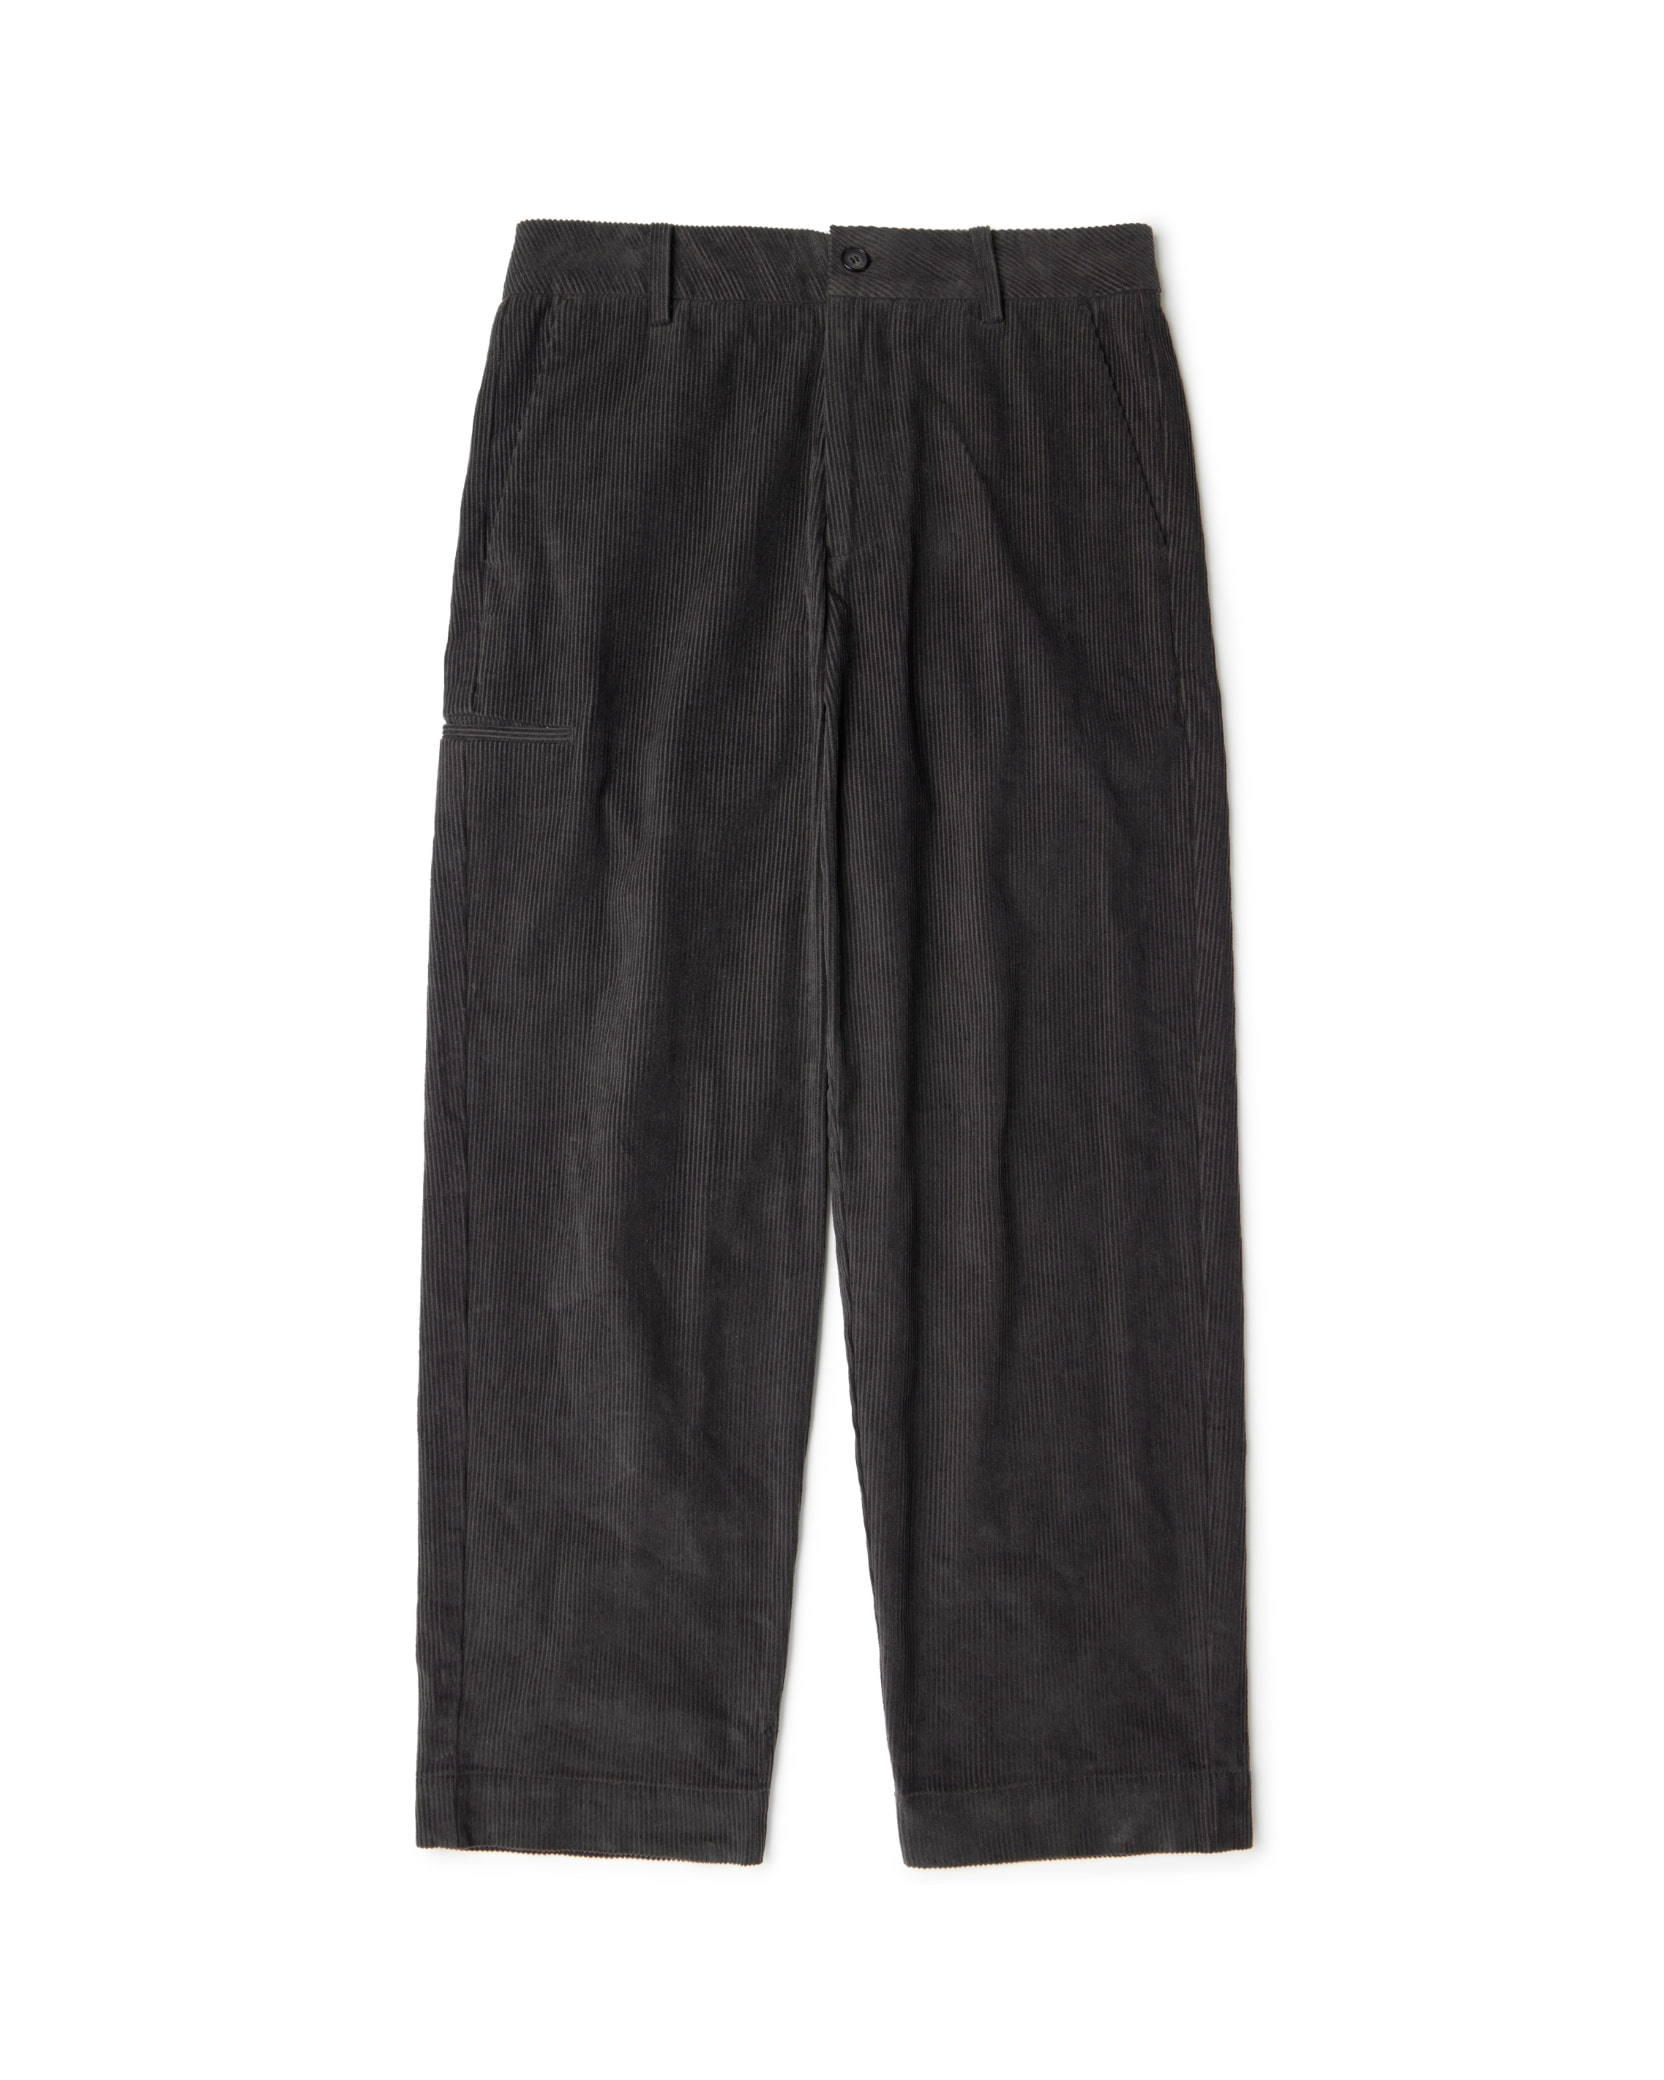 CODUROY RELAX FIT TROUSERS - CHARCOAL